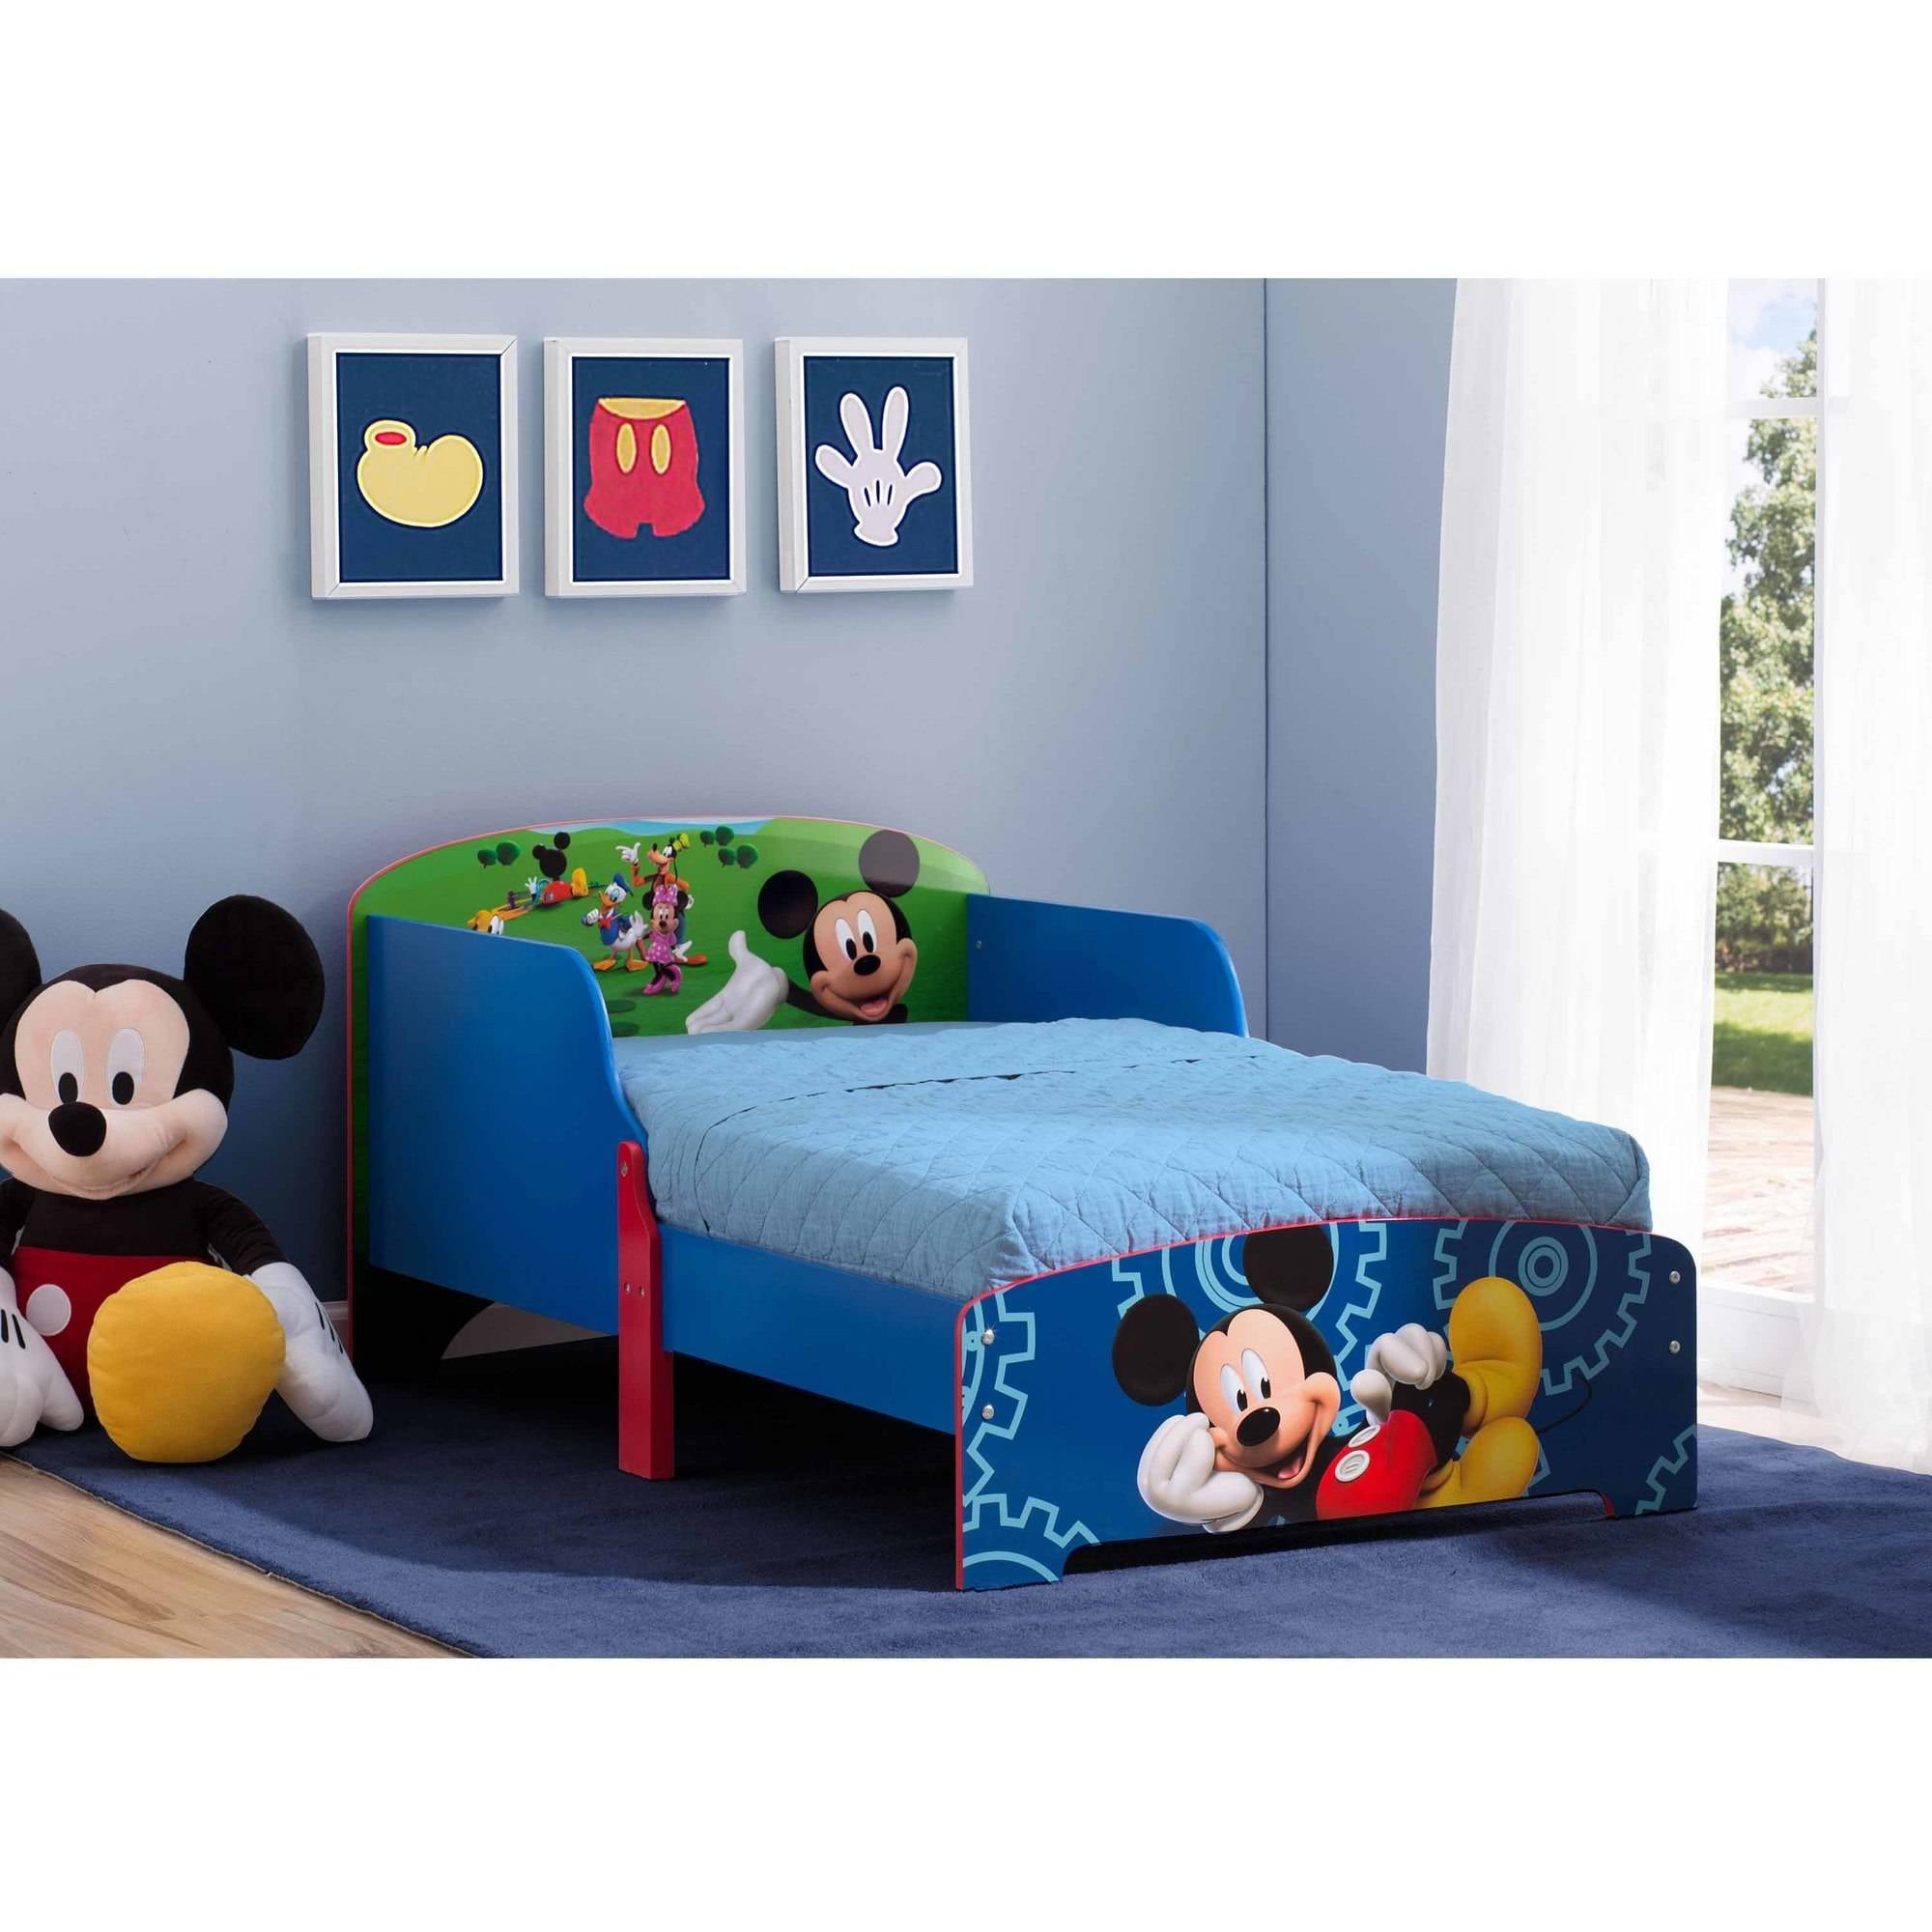 Delta Children Disney Mickey Mouse Wooden Toddler Bed, Blue 